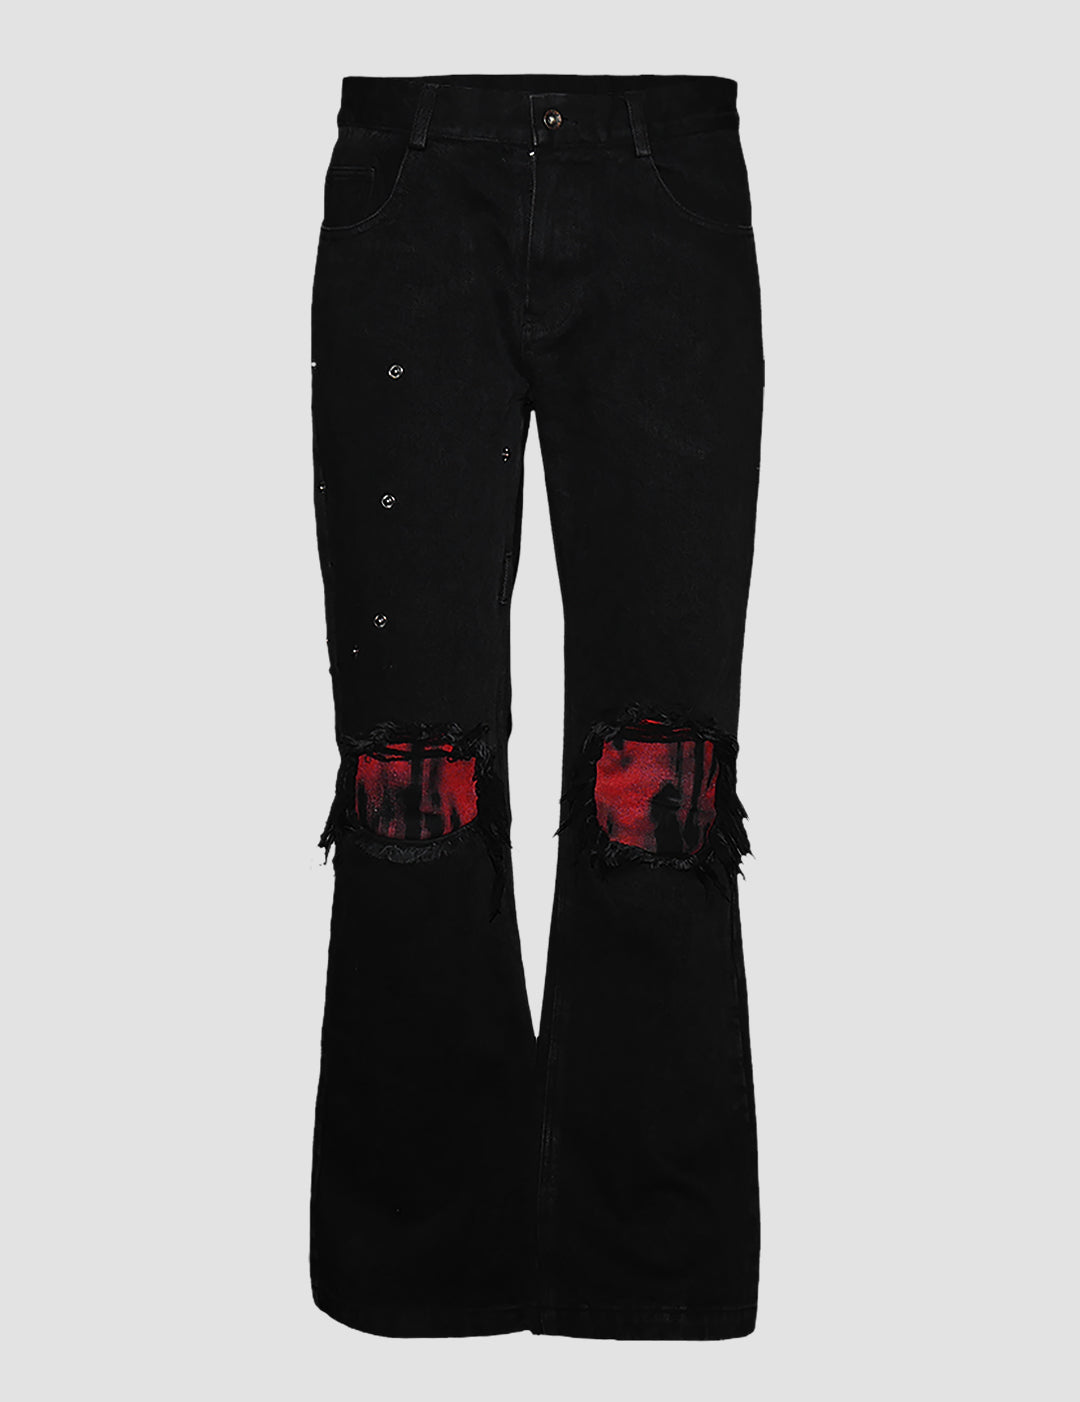 Counter Strafe Jeans